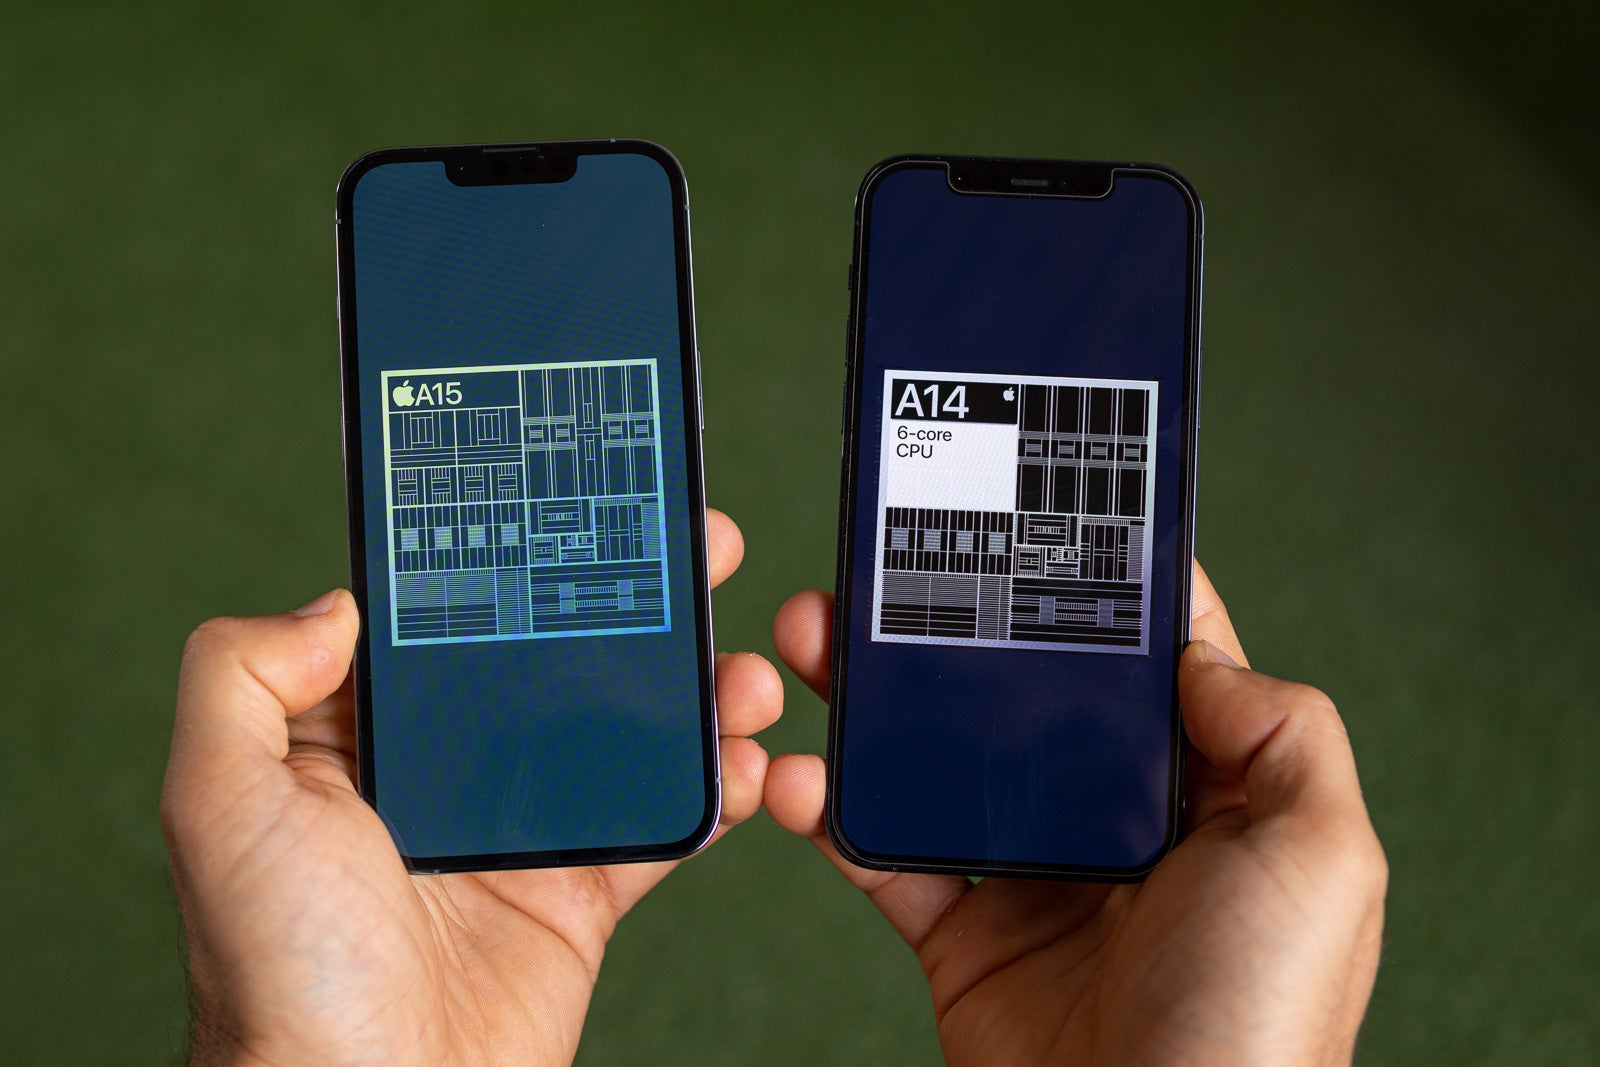 (image credit PhoneArena) iPhone 13 Pro and iPhone 12 Pro hardware comparison - iPhone 13 Pro vs iPhone 12 Pro: a worthy upgrade?